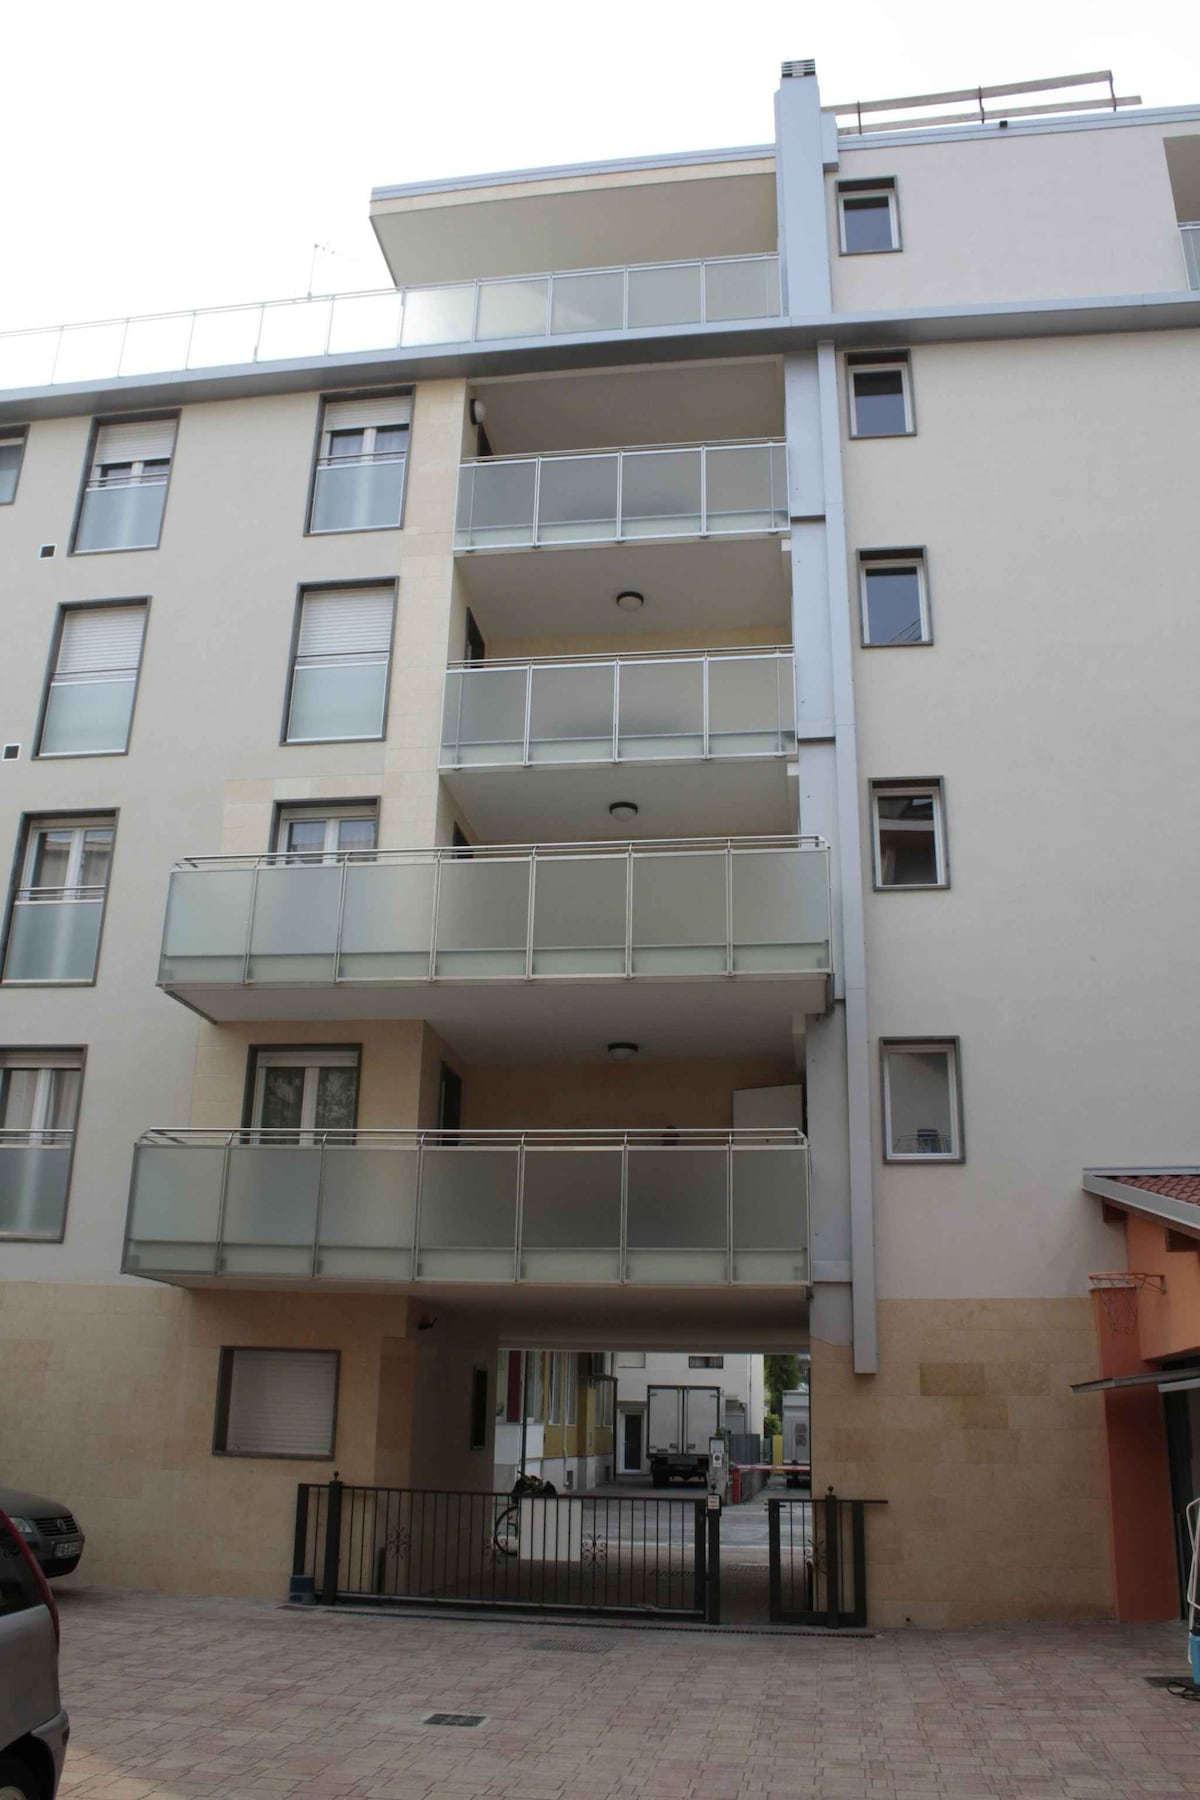 Holiday apartment with balcony and air conditionin